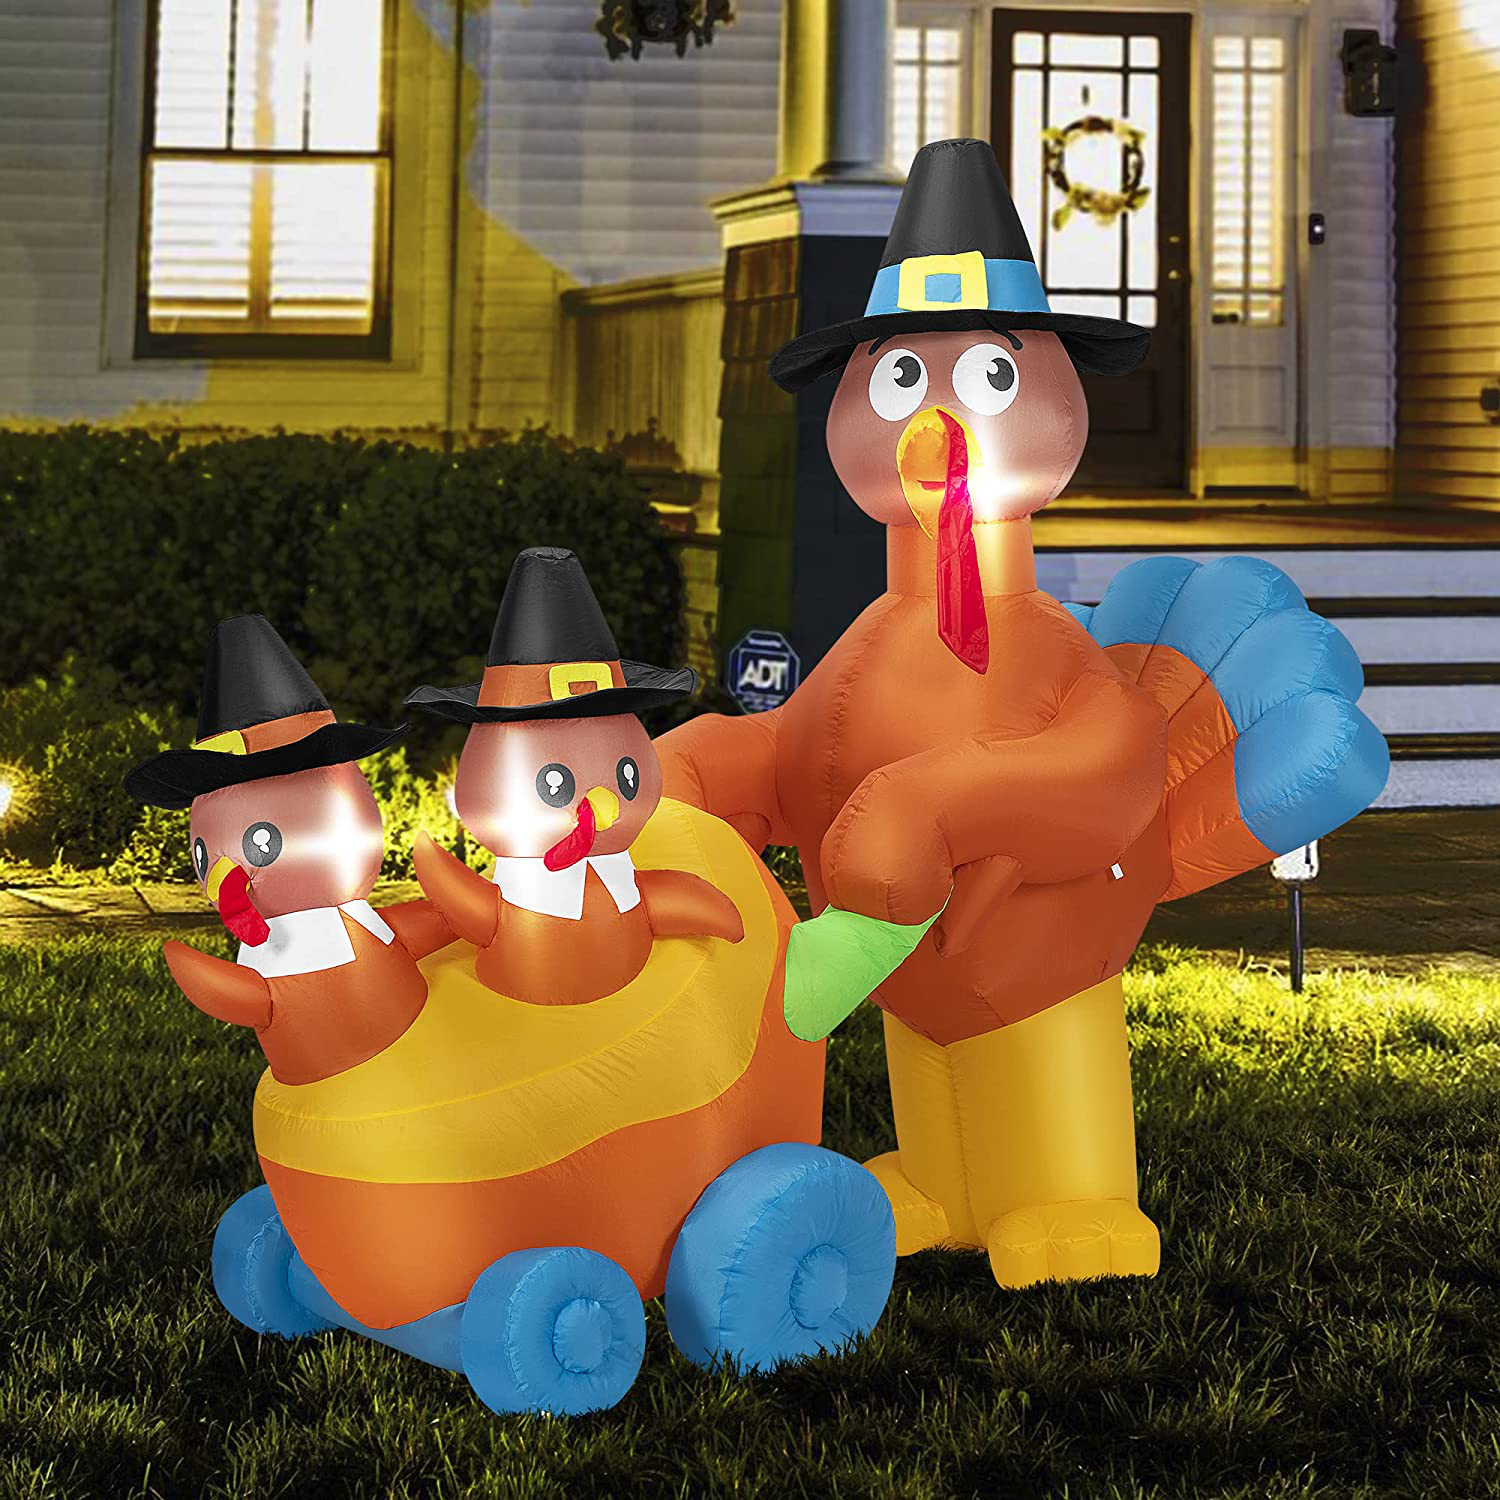 Details about   VIVOHOME 5X7 High Inflatable Turkey LED Airblown Thanksgiving Outdoor Yard Decor 